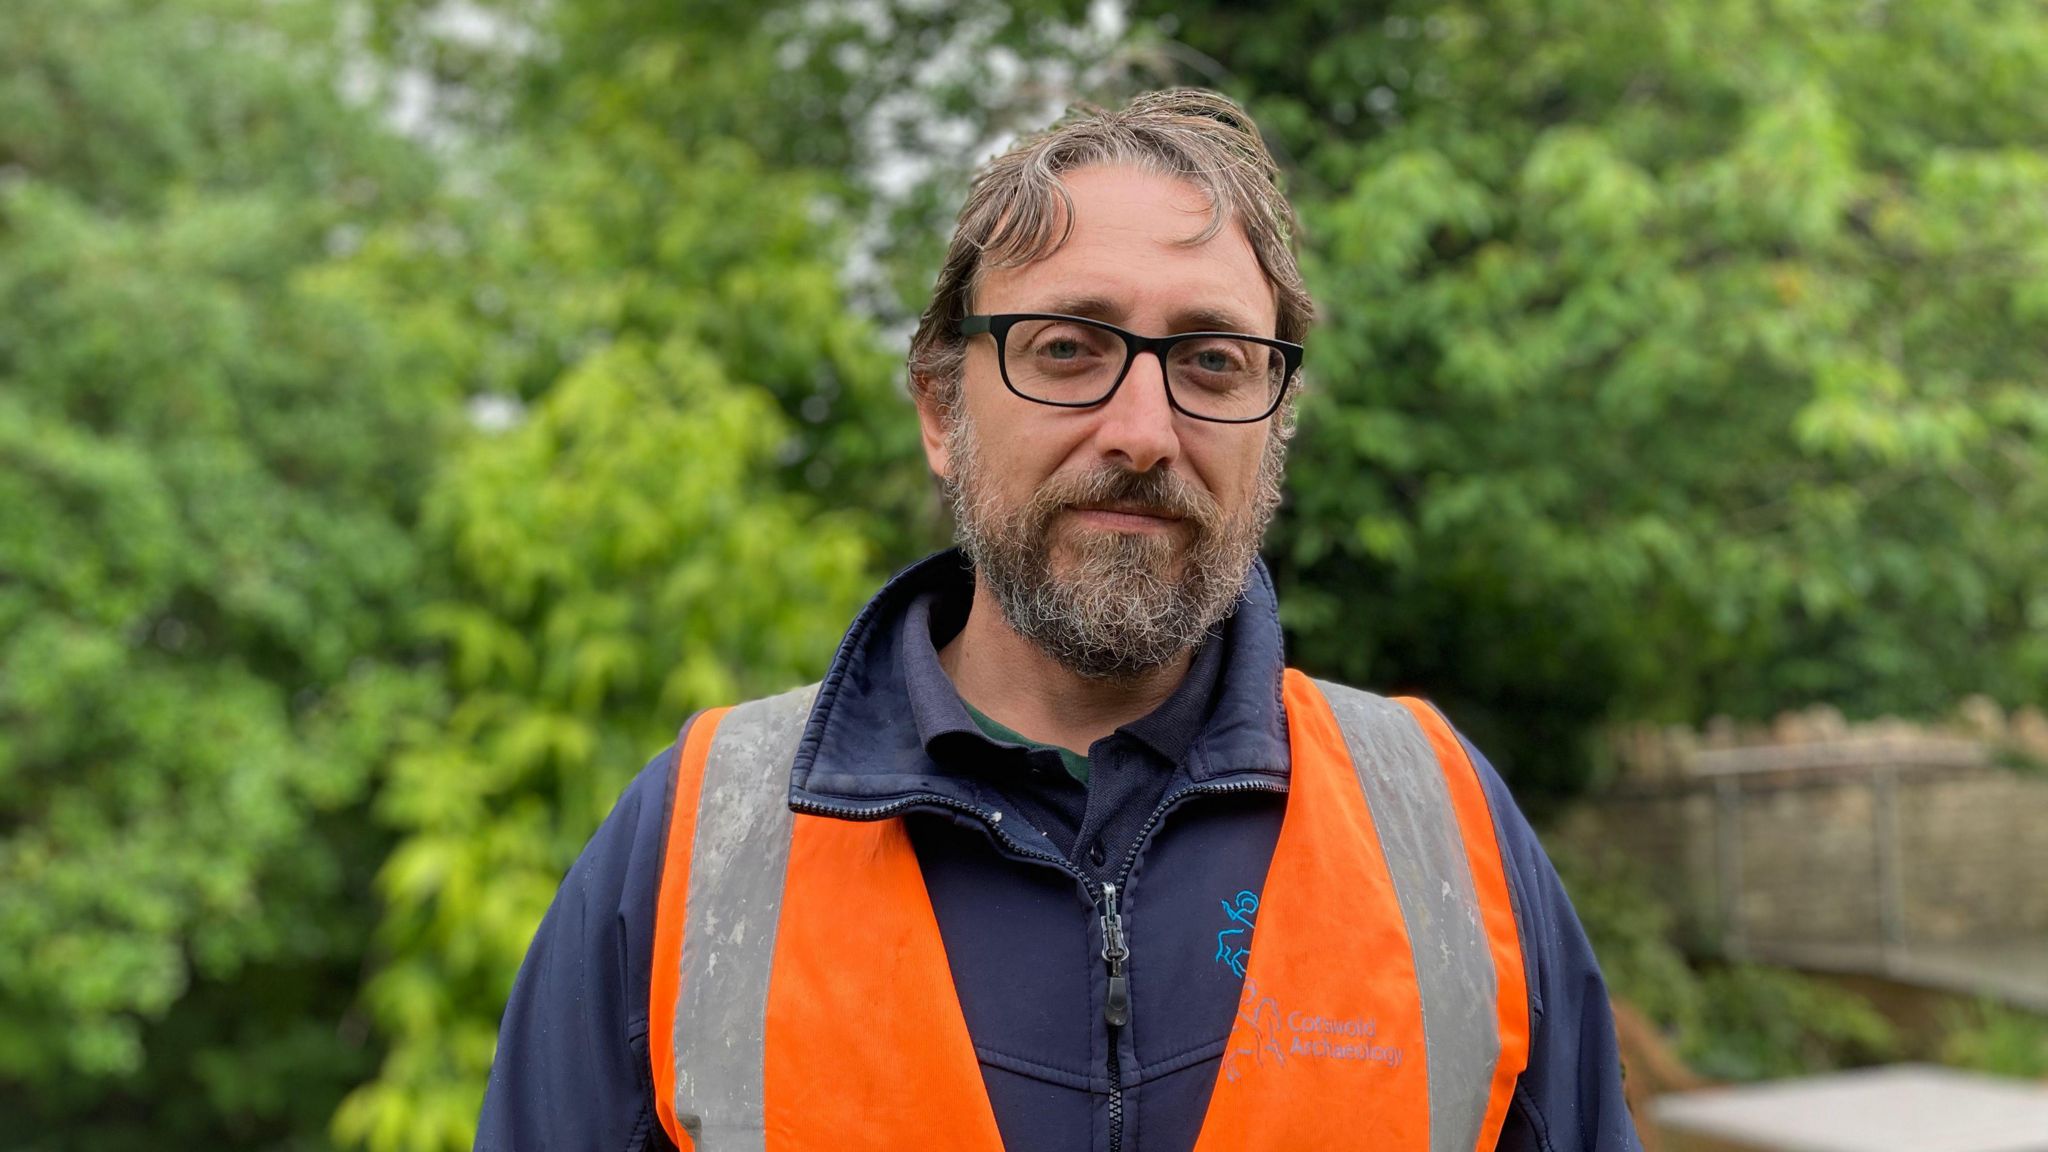 Paulo Guarino wearing glasses and high-vis vest looks into the camera